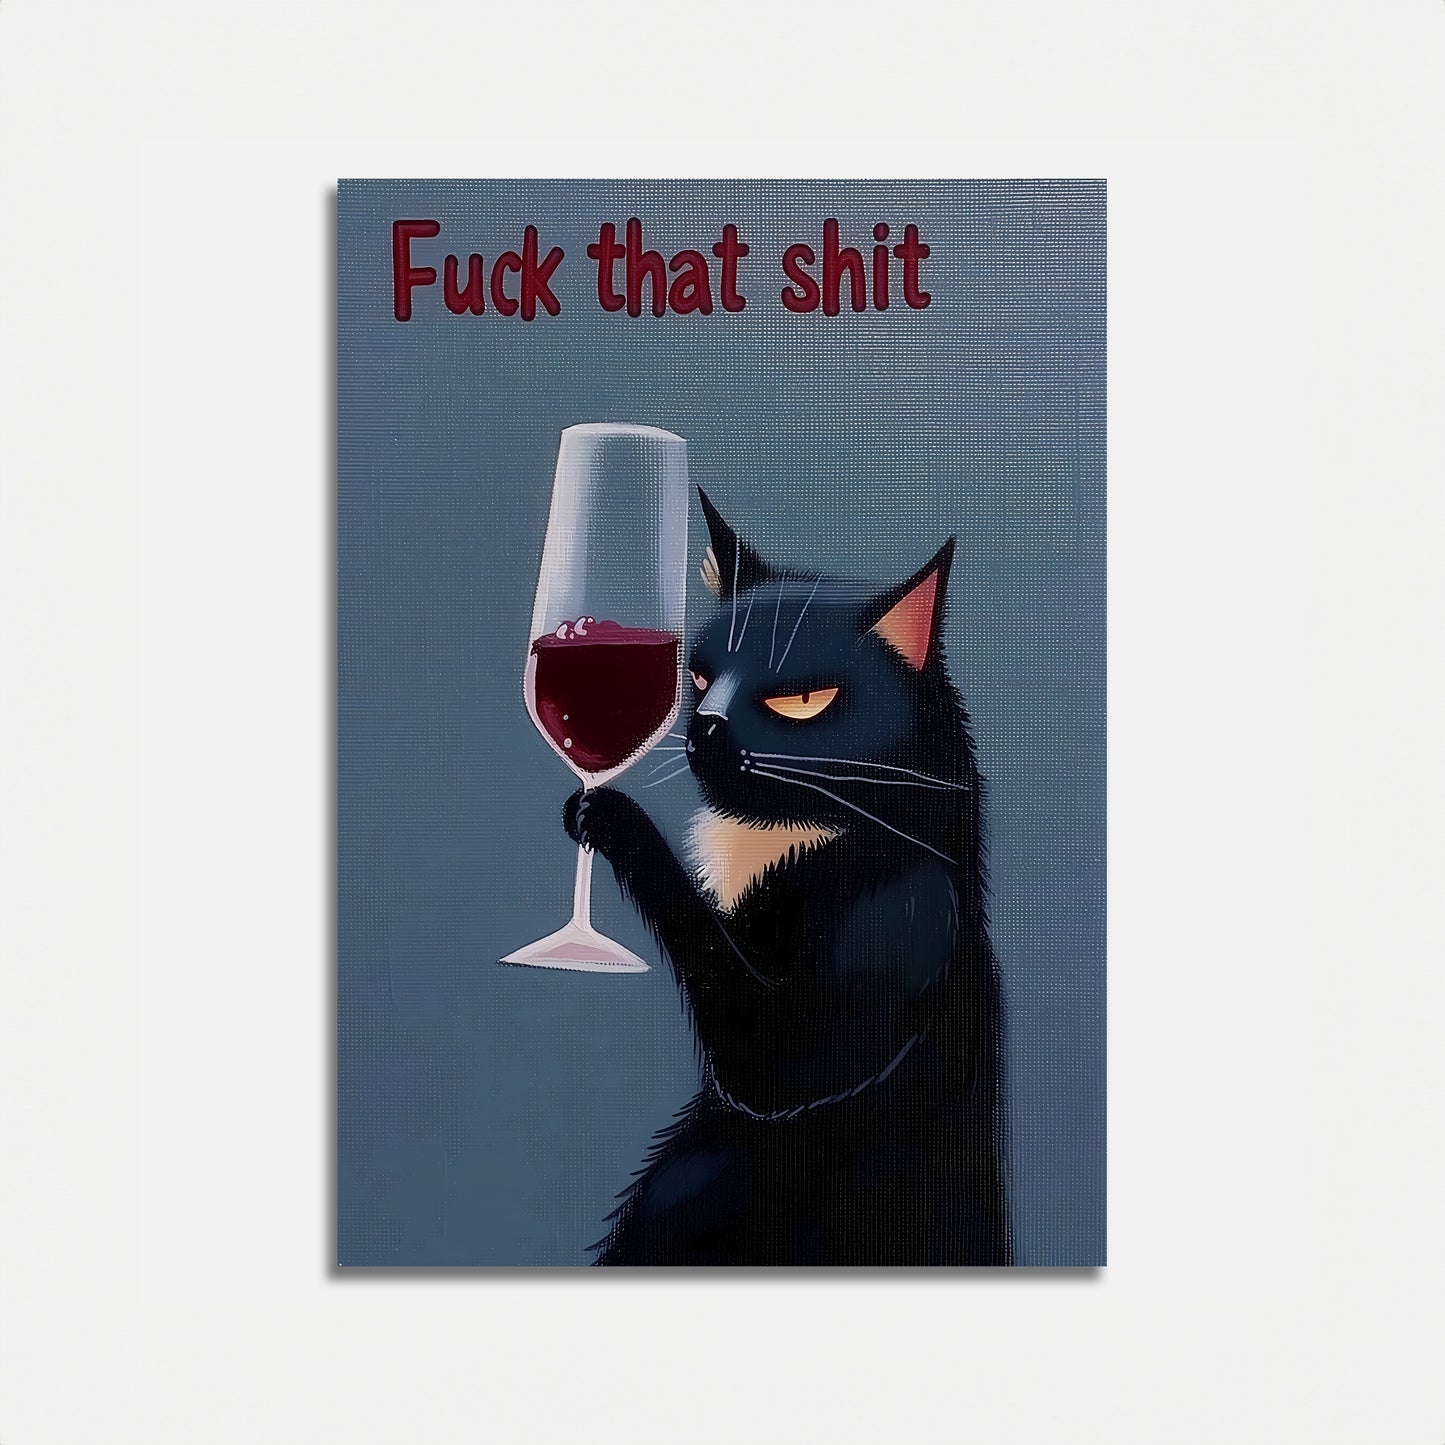 An illustration of a displeased black cat holding a wine glass, with a bold caption above it.